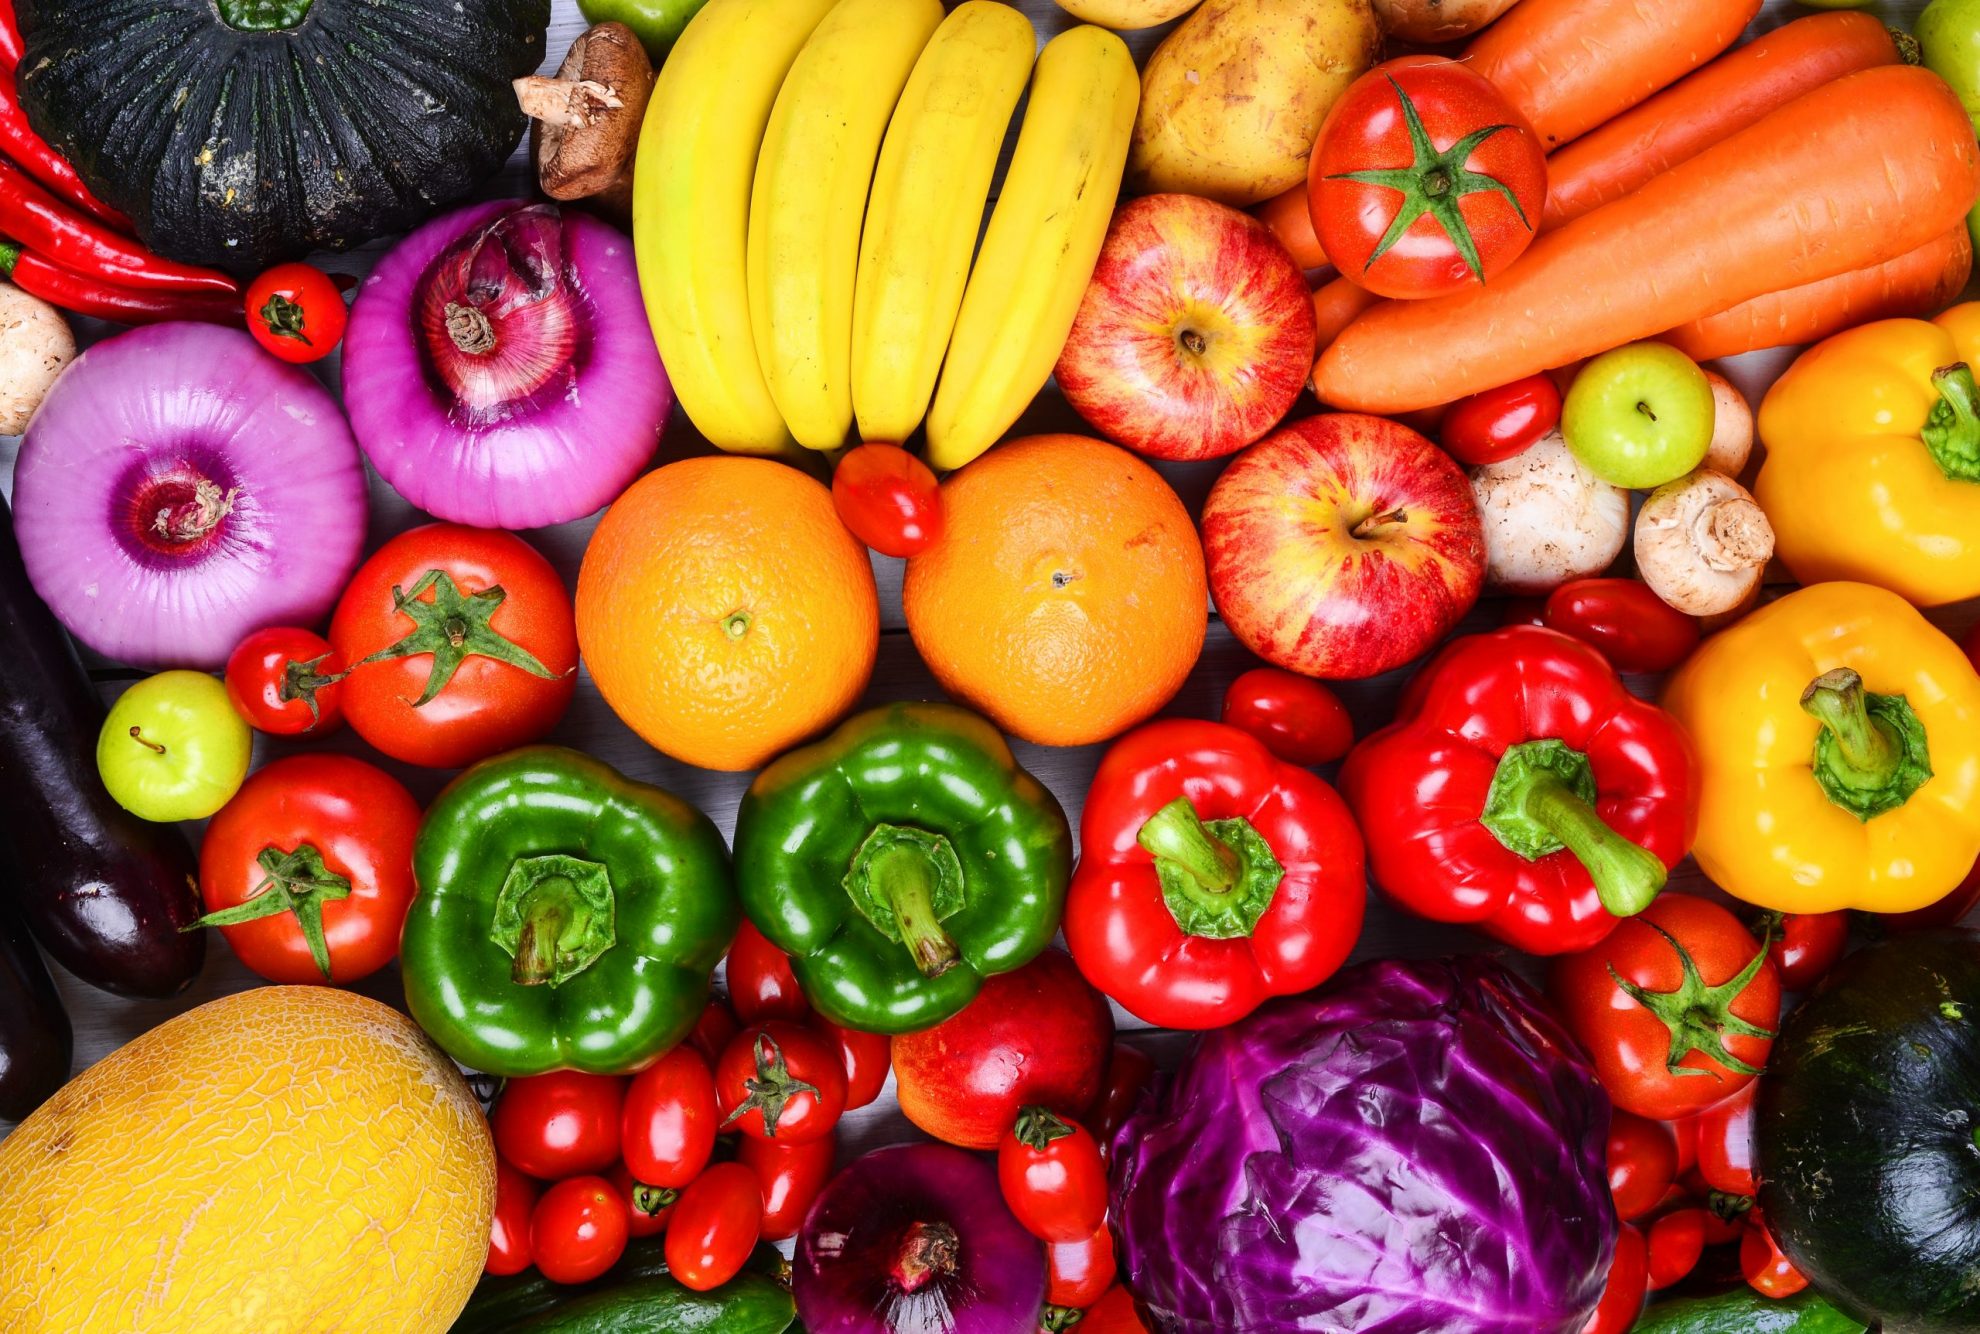 These Are the Main Differences Between Fruits and Vegetables